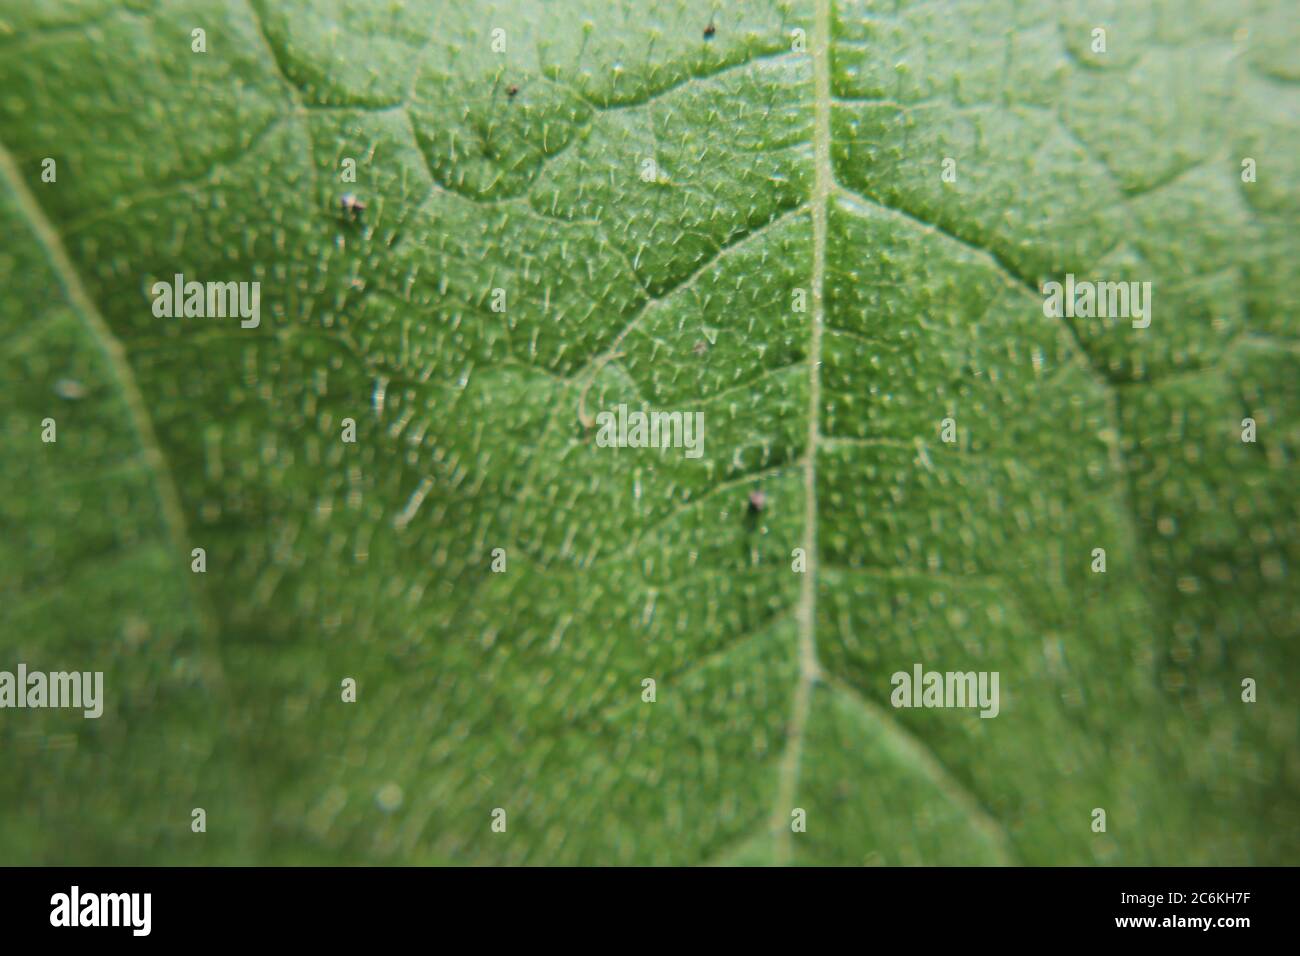 Closeup of a common pumpkin plant leaf growing in the backyard vegetable garden. Stock Photo